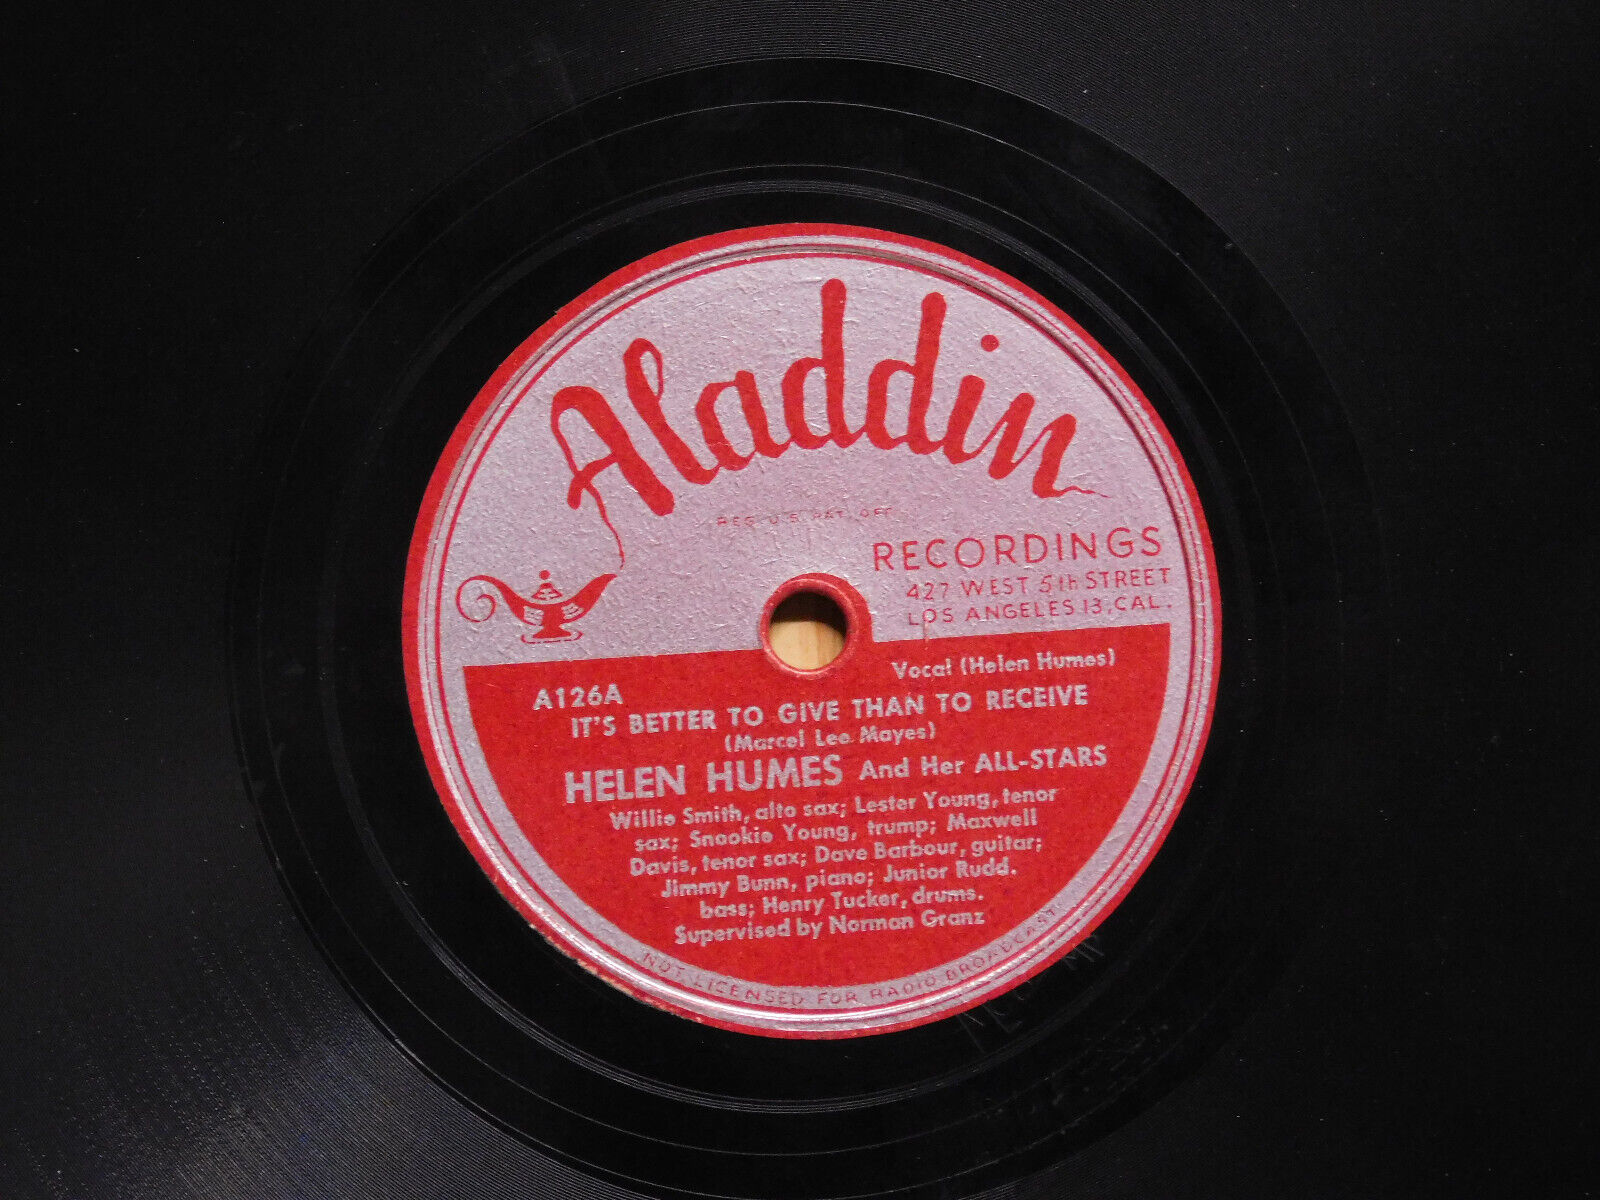 Helen Humes jazz blues 78 Its Better To Give Than To Receive bw See See Rider